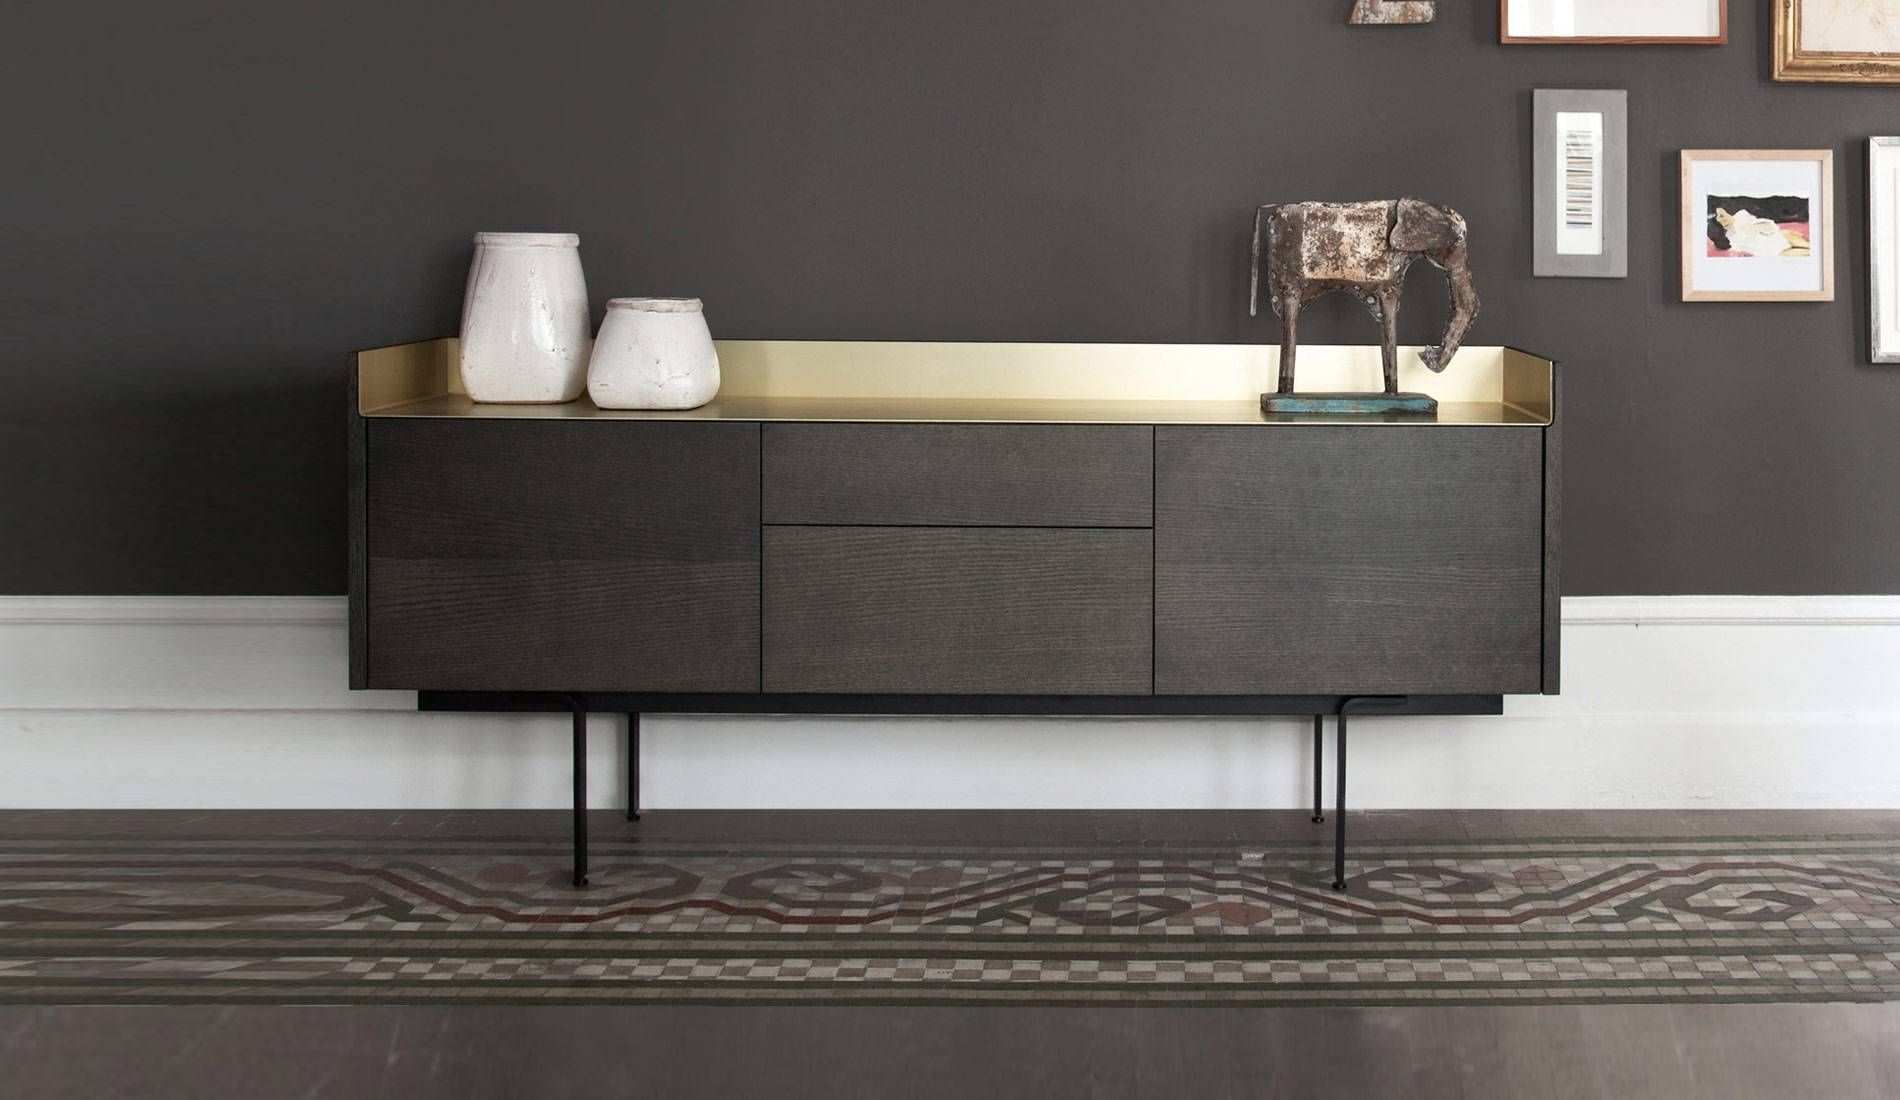 Antique Grey Oak Sideboard Design Featuring Cabinet And Drawers Inside Modern And Stylish Gold Sideboards (View 6 of 15)